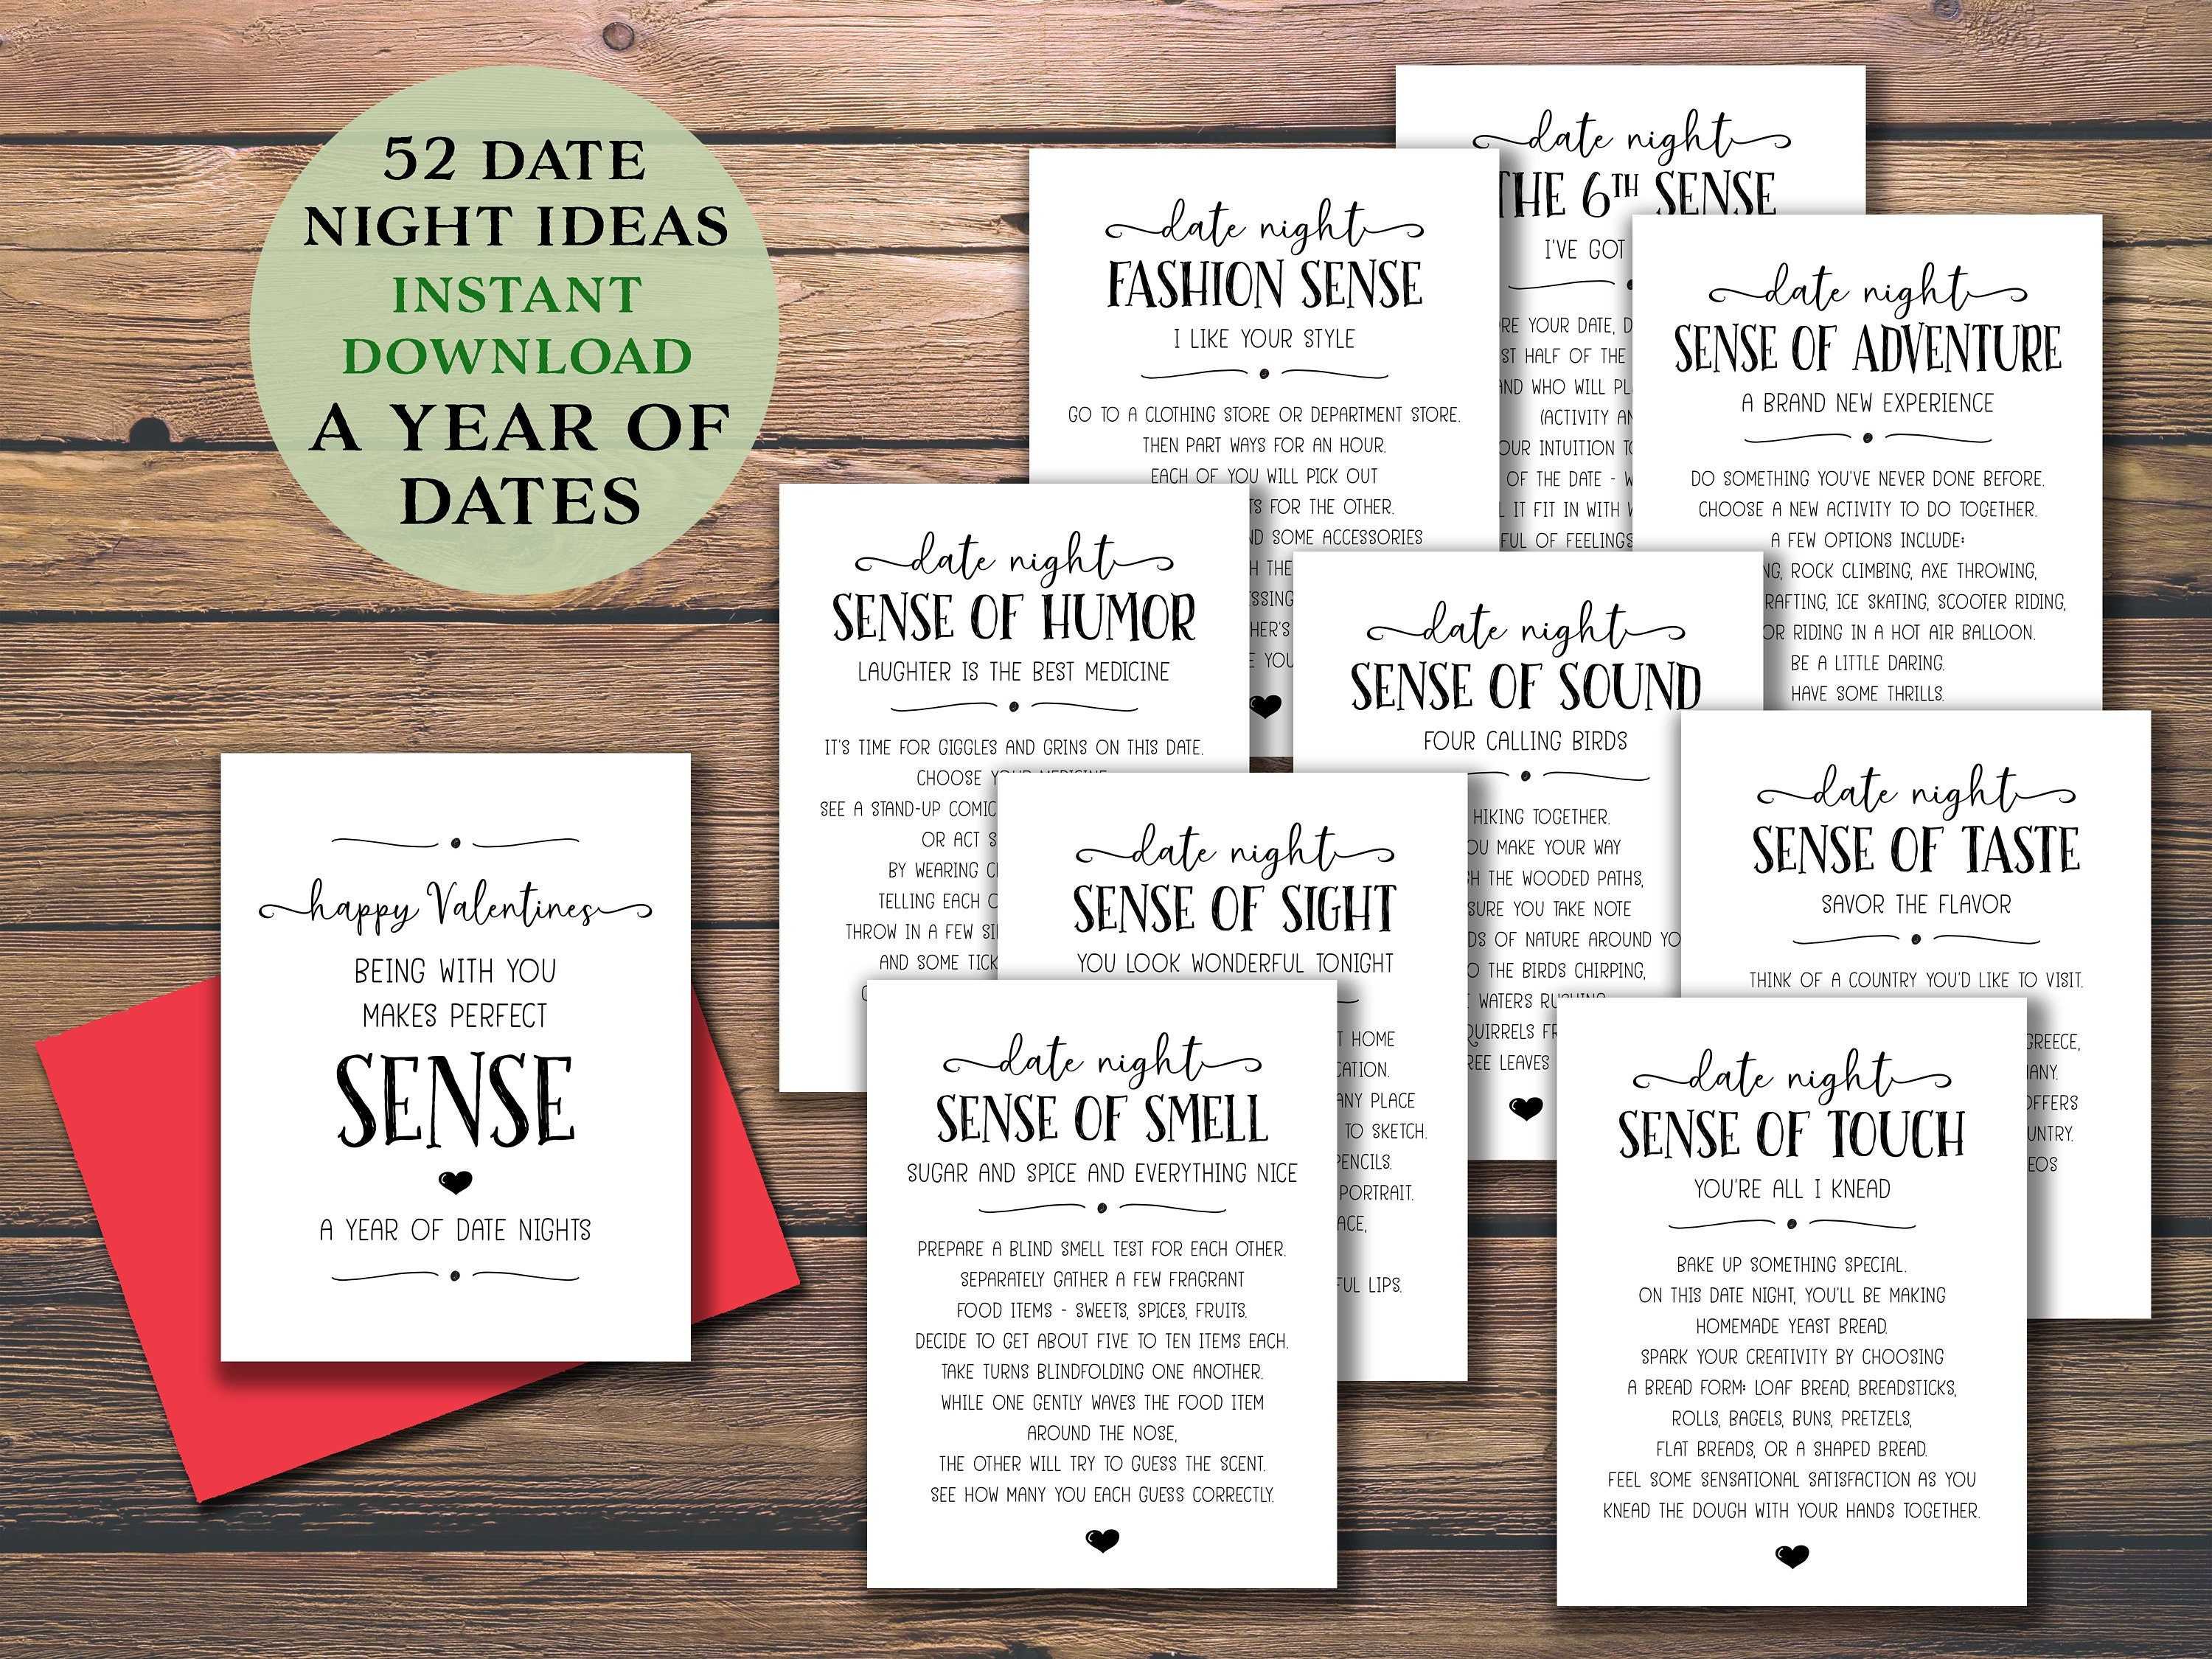 5 Senses Gift Tags & Card for Birthdays, Anniversary, Valentine's Day,  Christmas Romantic Gift Ideas for Husband, Wife, Him or Her LN08 